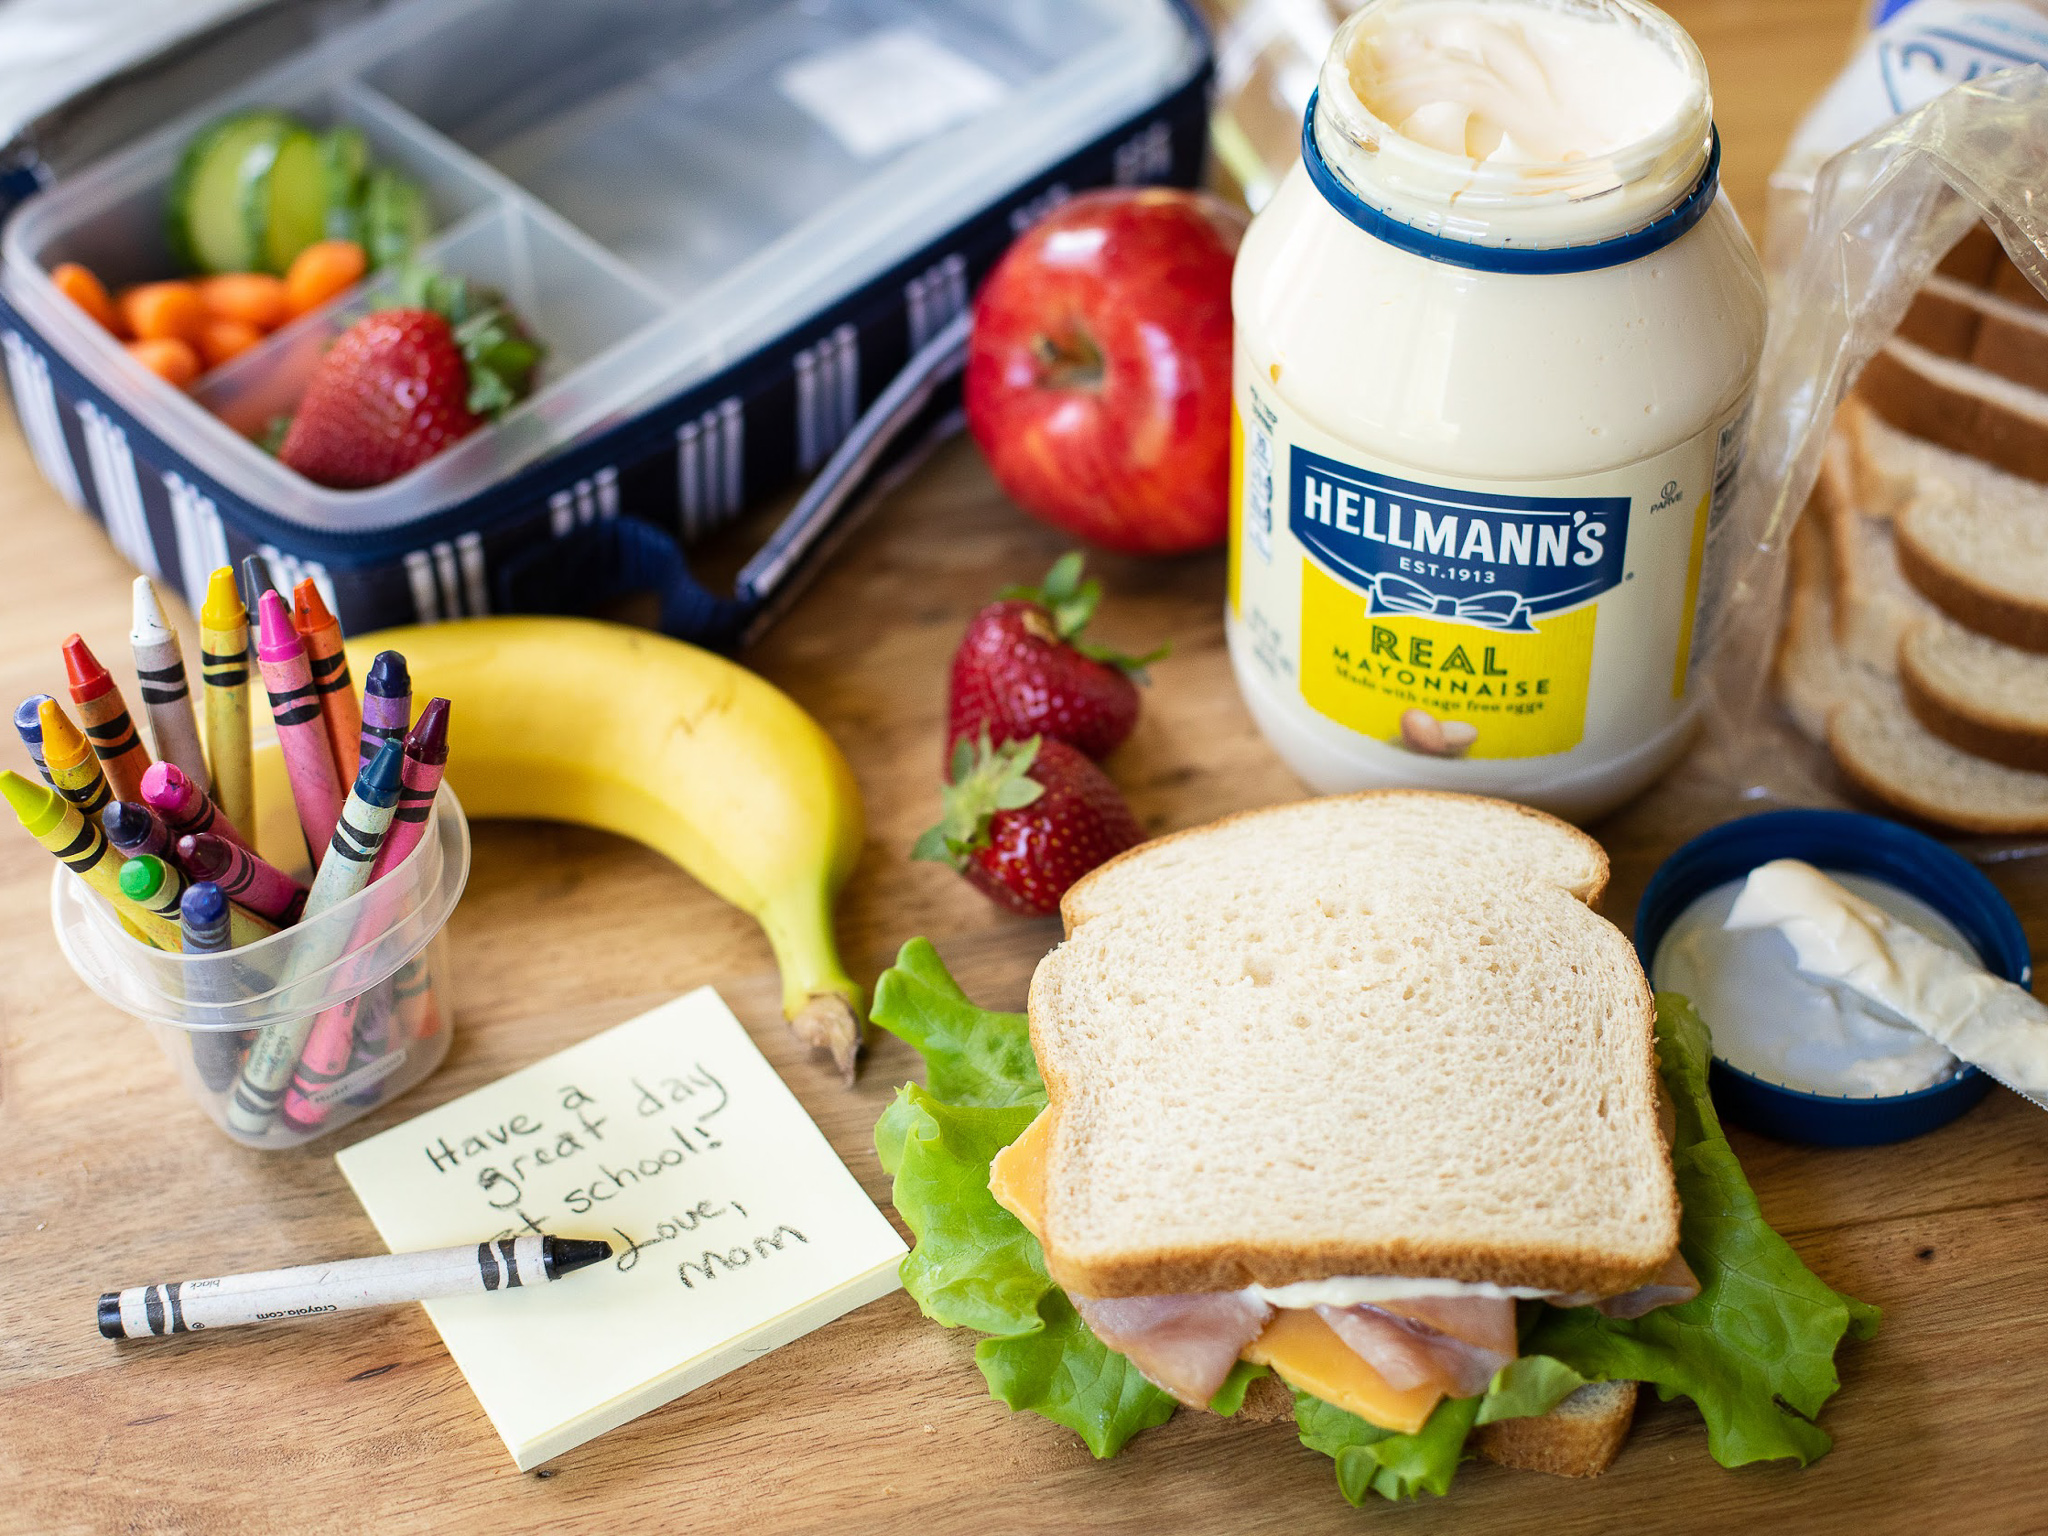 Back To School Lunches Means You Need Plenty Of Hellmann's Mayonnaise On Hand! on I Heart Publix